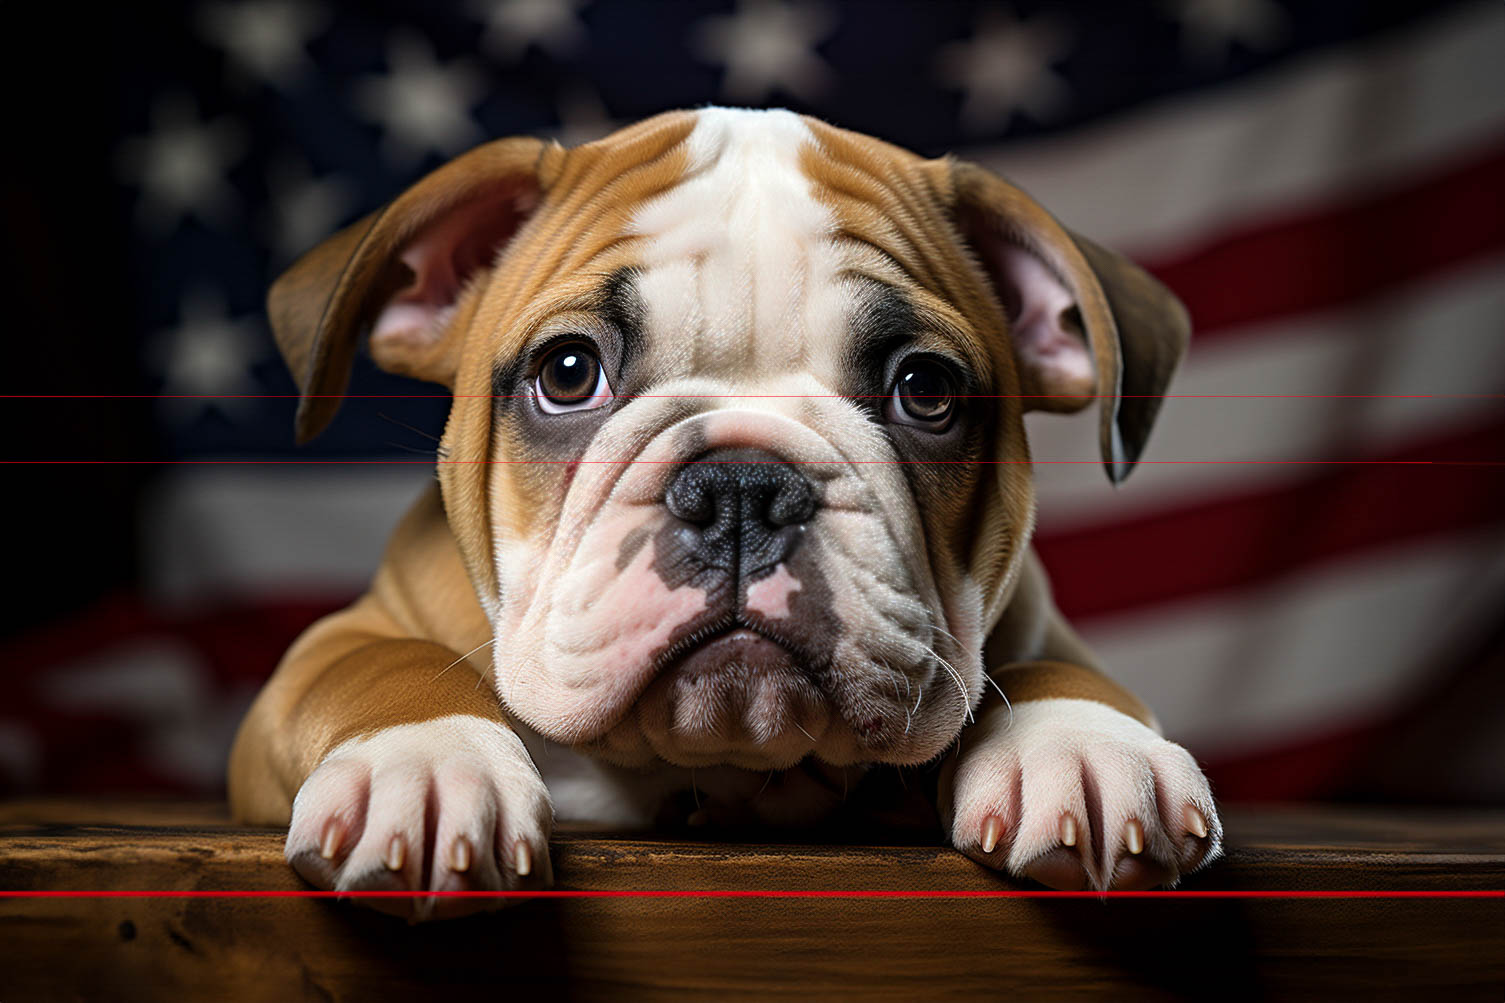 The artwork features a young bulldog resting its front paws on a wooden surface. The dog gazes directly at the viewer with large, soulful eyes, and its facial expression is endearing. The puppy has wrinkled, tan and white fur, with distinctive folds and a black snout. The background displays the pattern of an American flag, with stars on the left and stripes on the right.